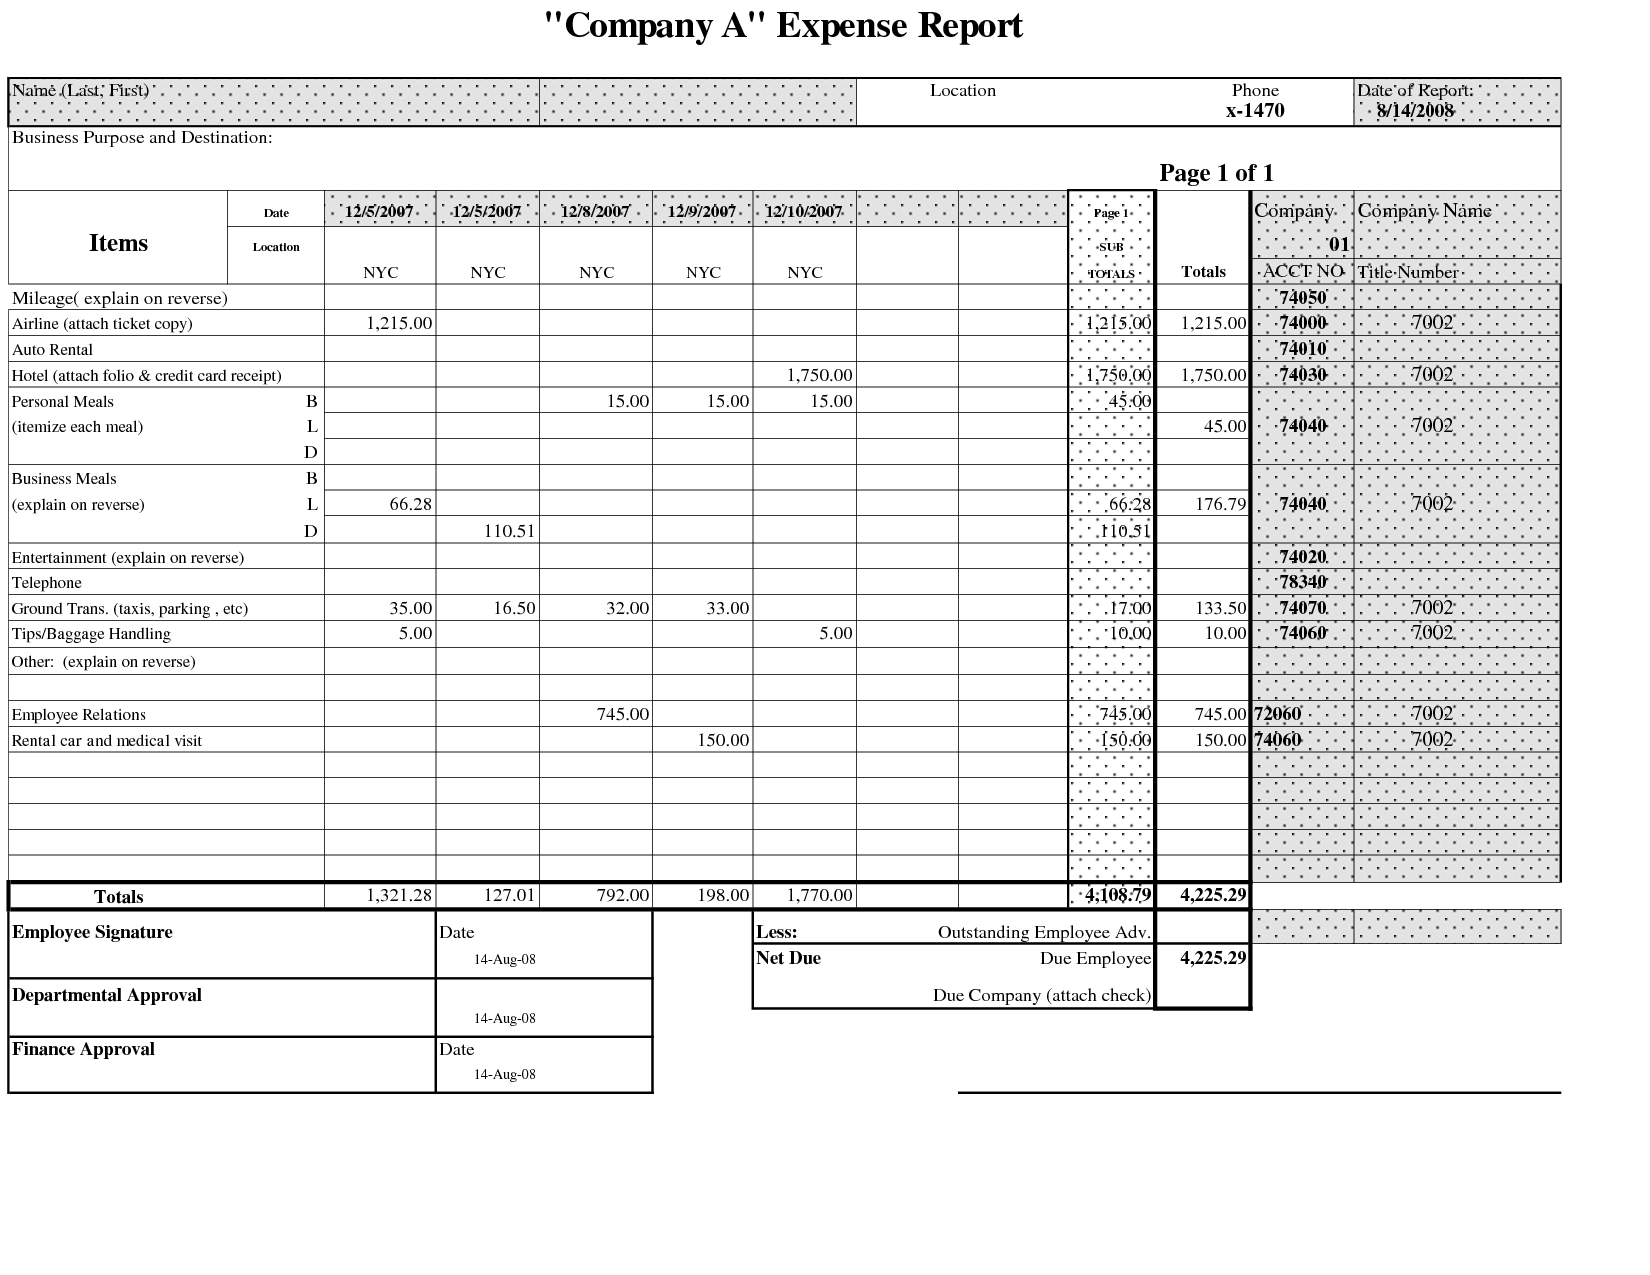 5 New Excel Report Templates | Excel Templates In Company Expense Report Template